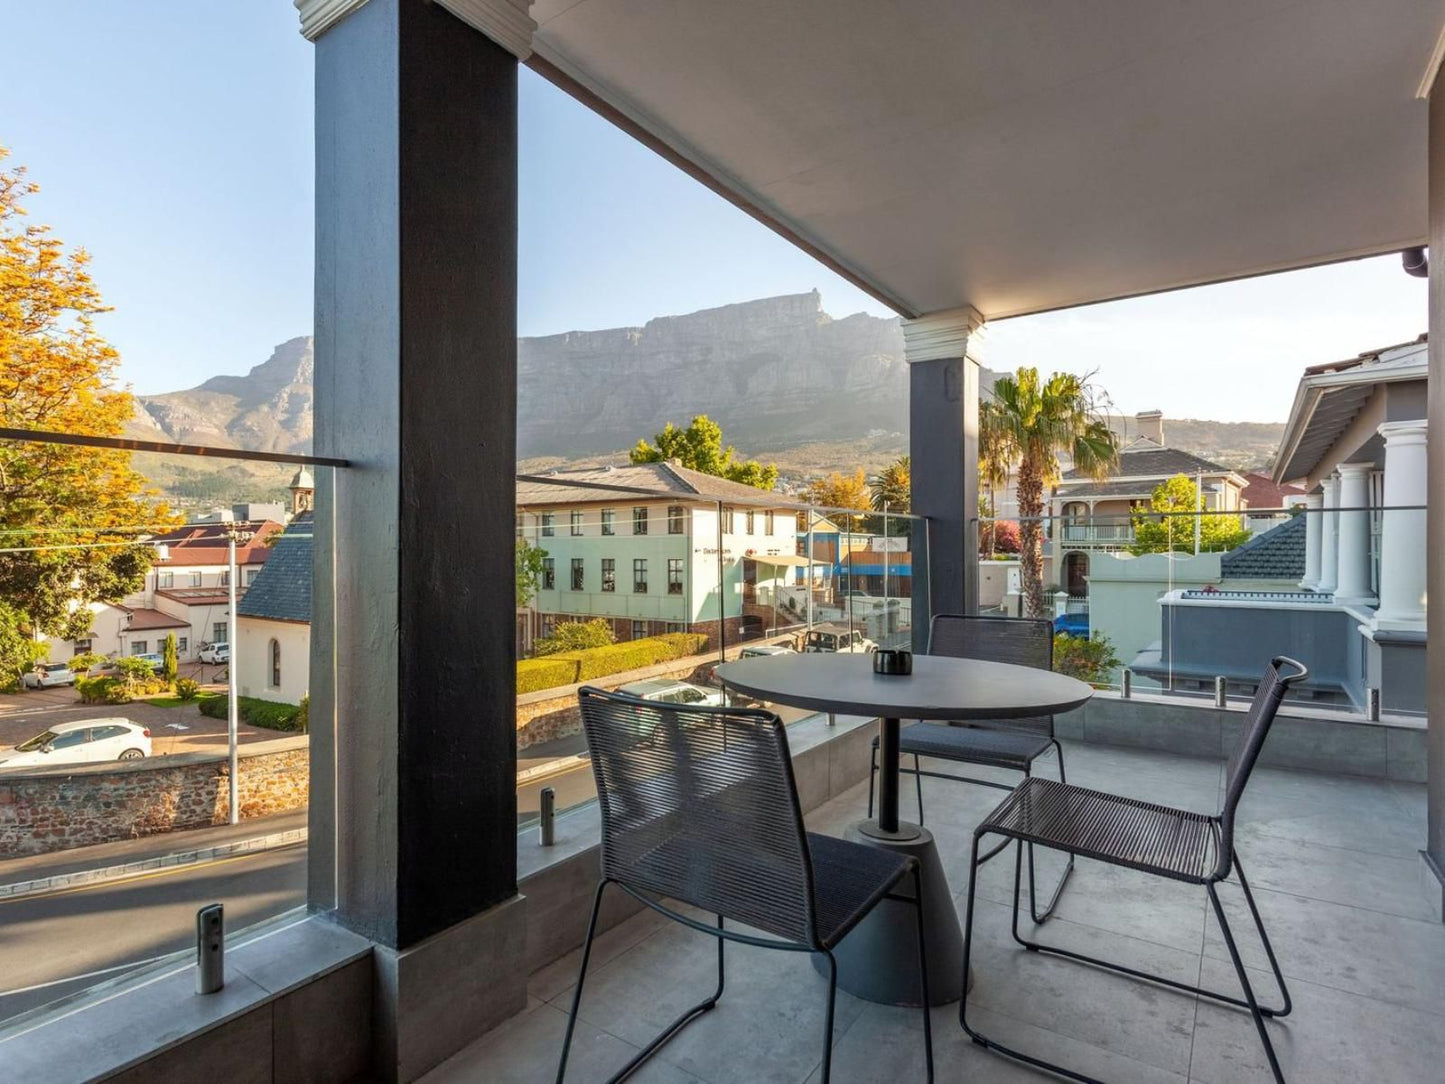 Cloud 9 Boutique Hotel And Spa Tamboerskloof Cape Town Western Cape South Africa House, Building, Architecture